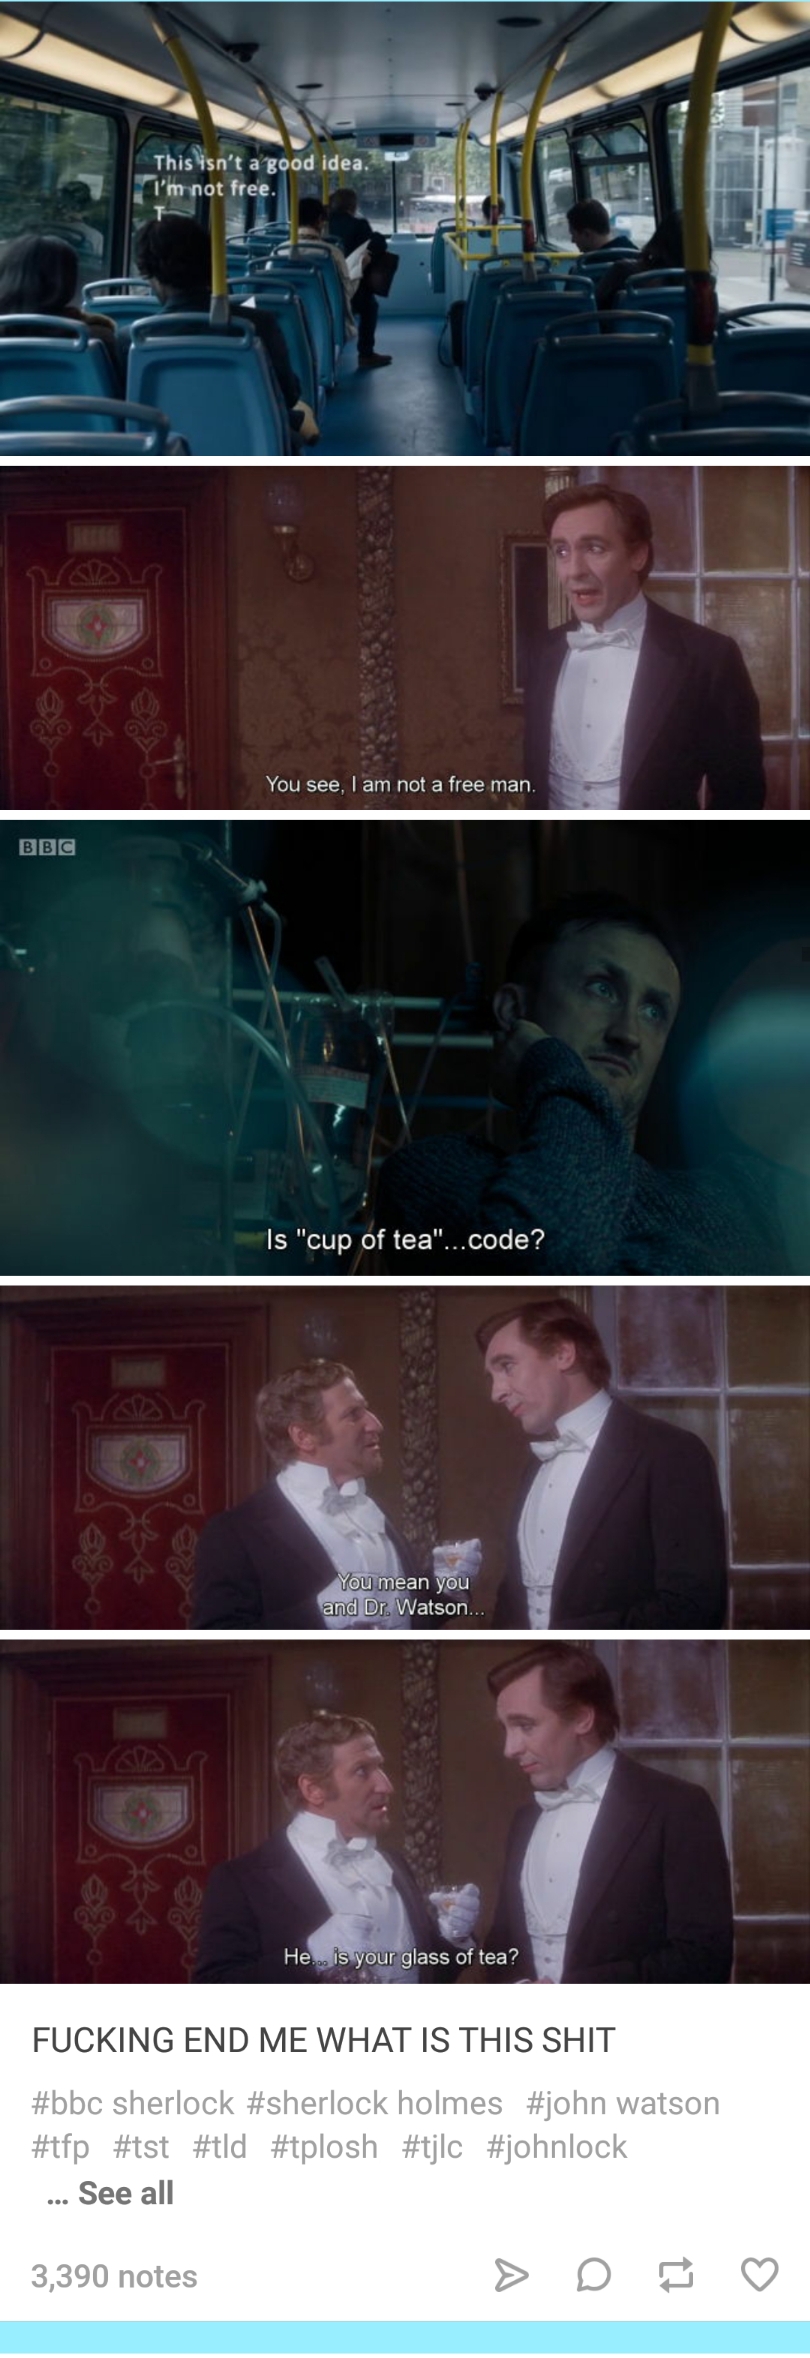 Five color images, screenshots from The Private Life of Sherlock Holmes, annotated with words. Top to bottom: image 1: [John Watson flirting with a woman via text]: This isn't a good idea. I'm not free. Image 2: [Holmes to Rogozhin]: You see, I'm not a free man. Image 3 (from Sherlock 4.1 'The Six Thatchers'): [Wiggins to Sherlock]: Is 'cup of tea'…code?. Image 4: [Rogozhin to Holmes]: You mean, you and Dr. Watson… Image 5: [continued] He…is your glass of tea? Bottom panel reads, 'FUCKING END ME WHAT IS THIS SHIT' with the following hashtags: #bbc sherlock #sherlock holmes #john watson #ftp #tst #tld #tplosh #tjlc #johnlock.